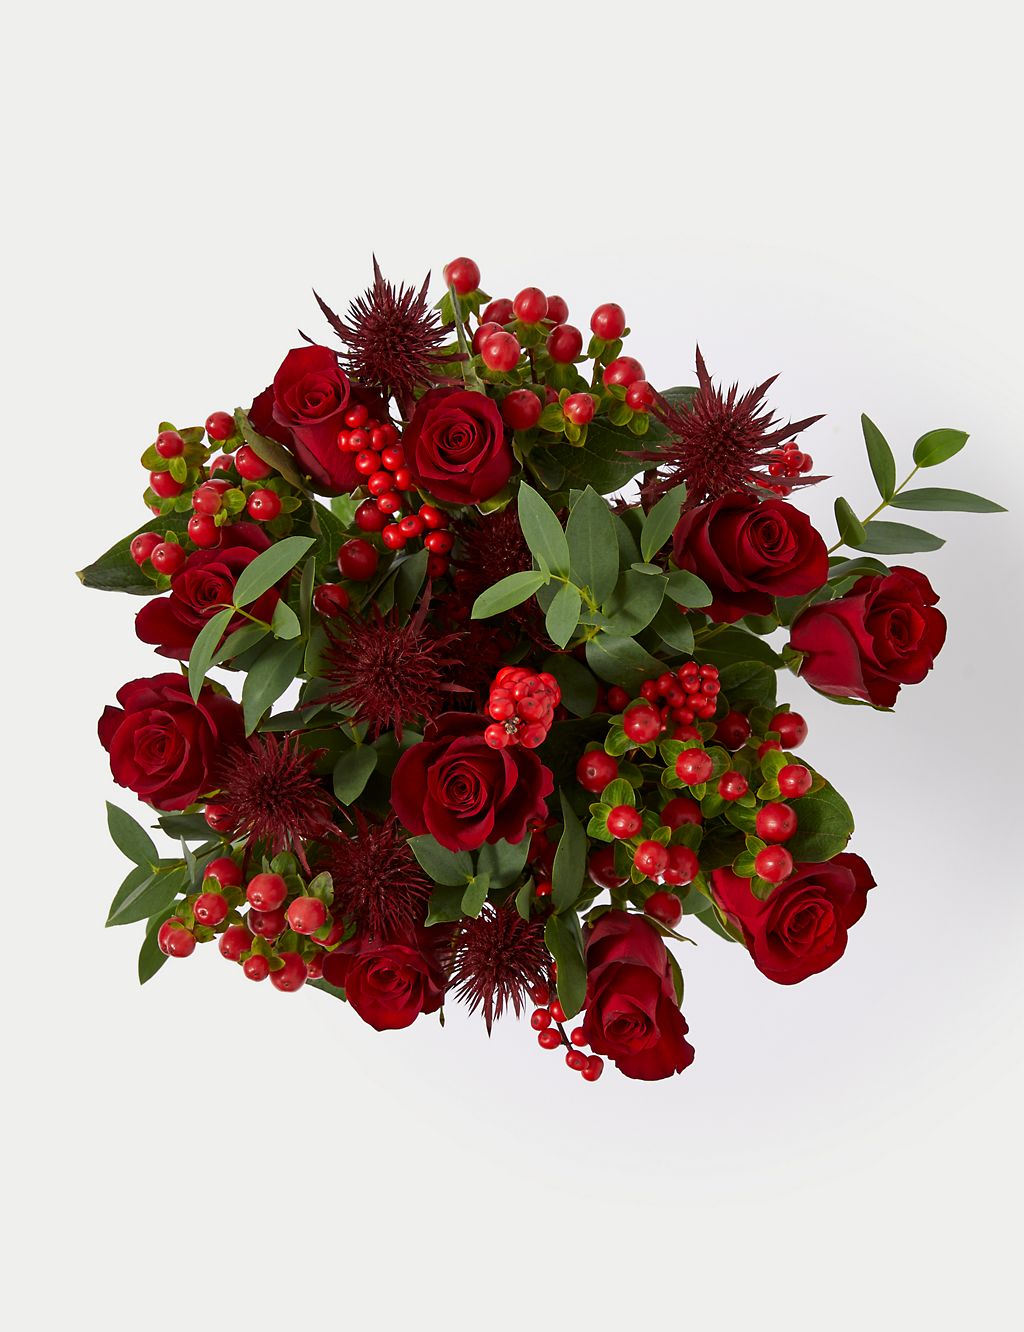 Festive Red Rose Bouquet in Vase 1 of 5